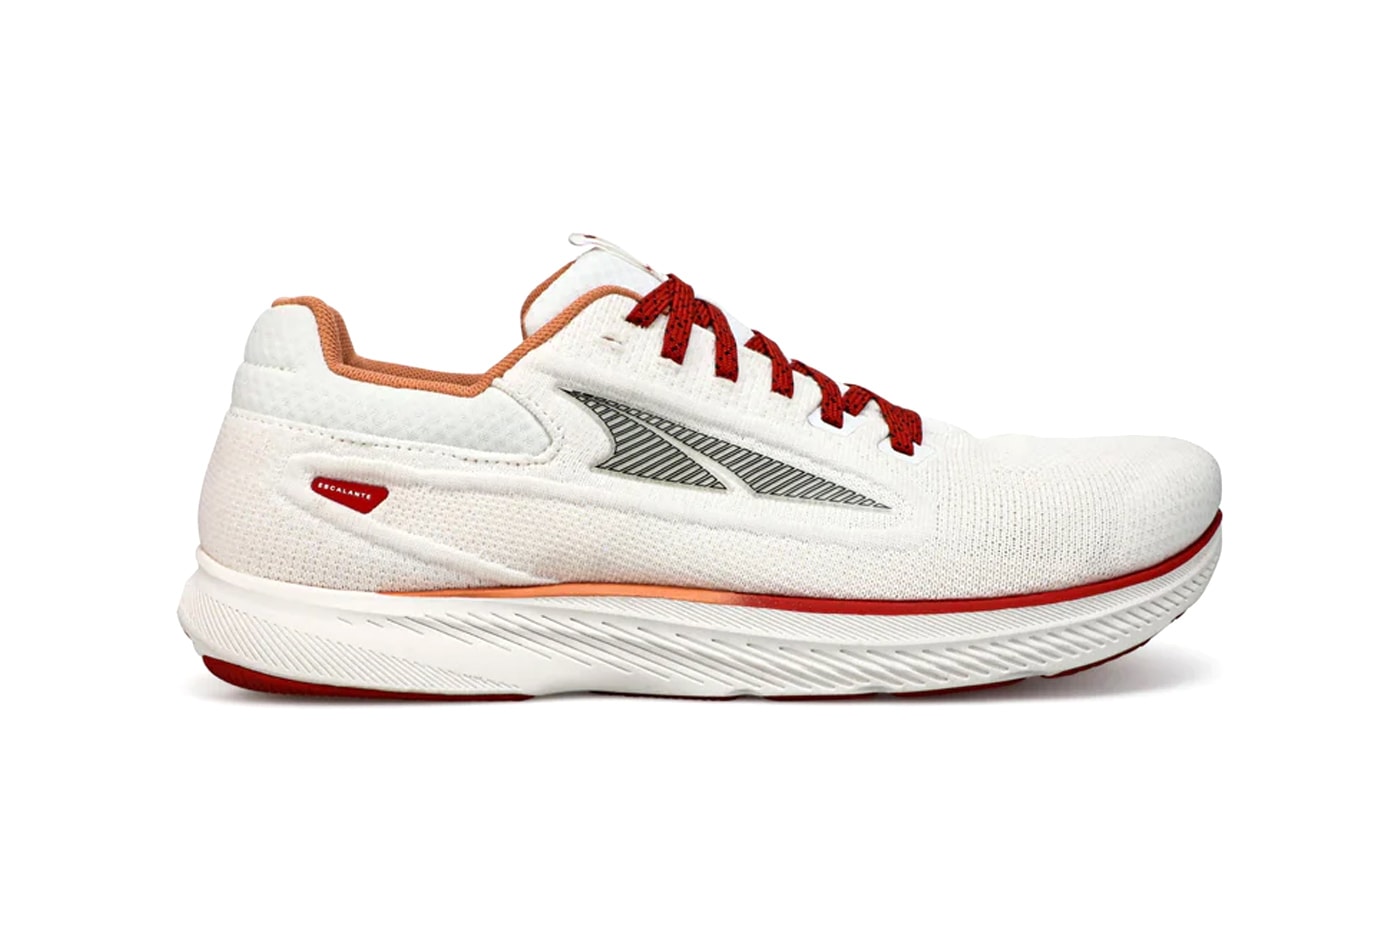 ALTRA Escalante 3 The best running shoes right now